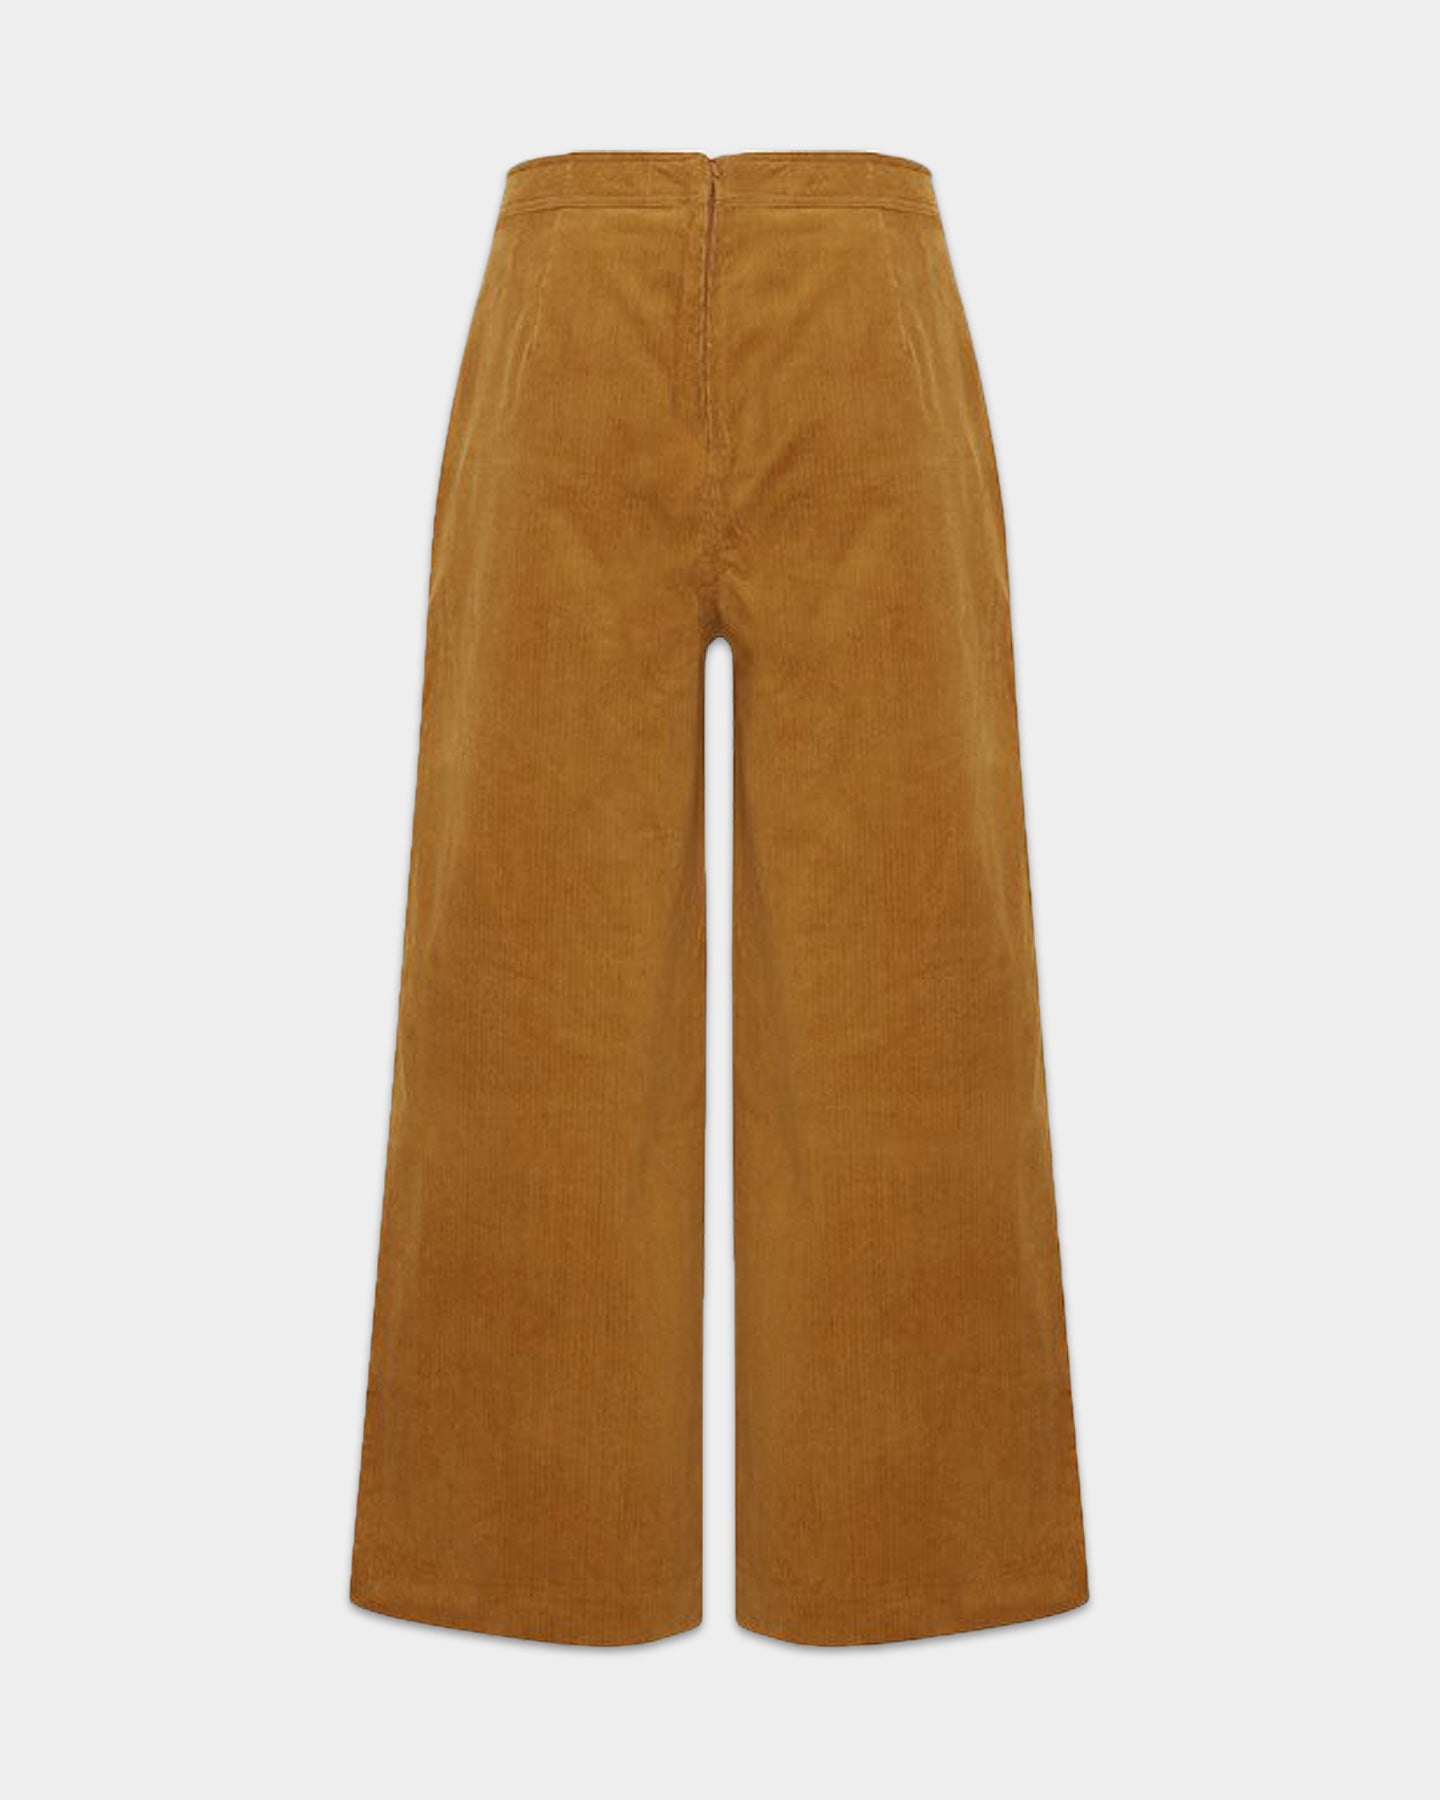 CASSIA PANT - cathay spice